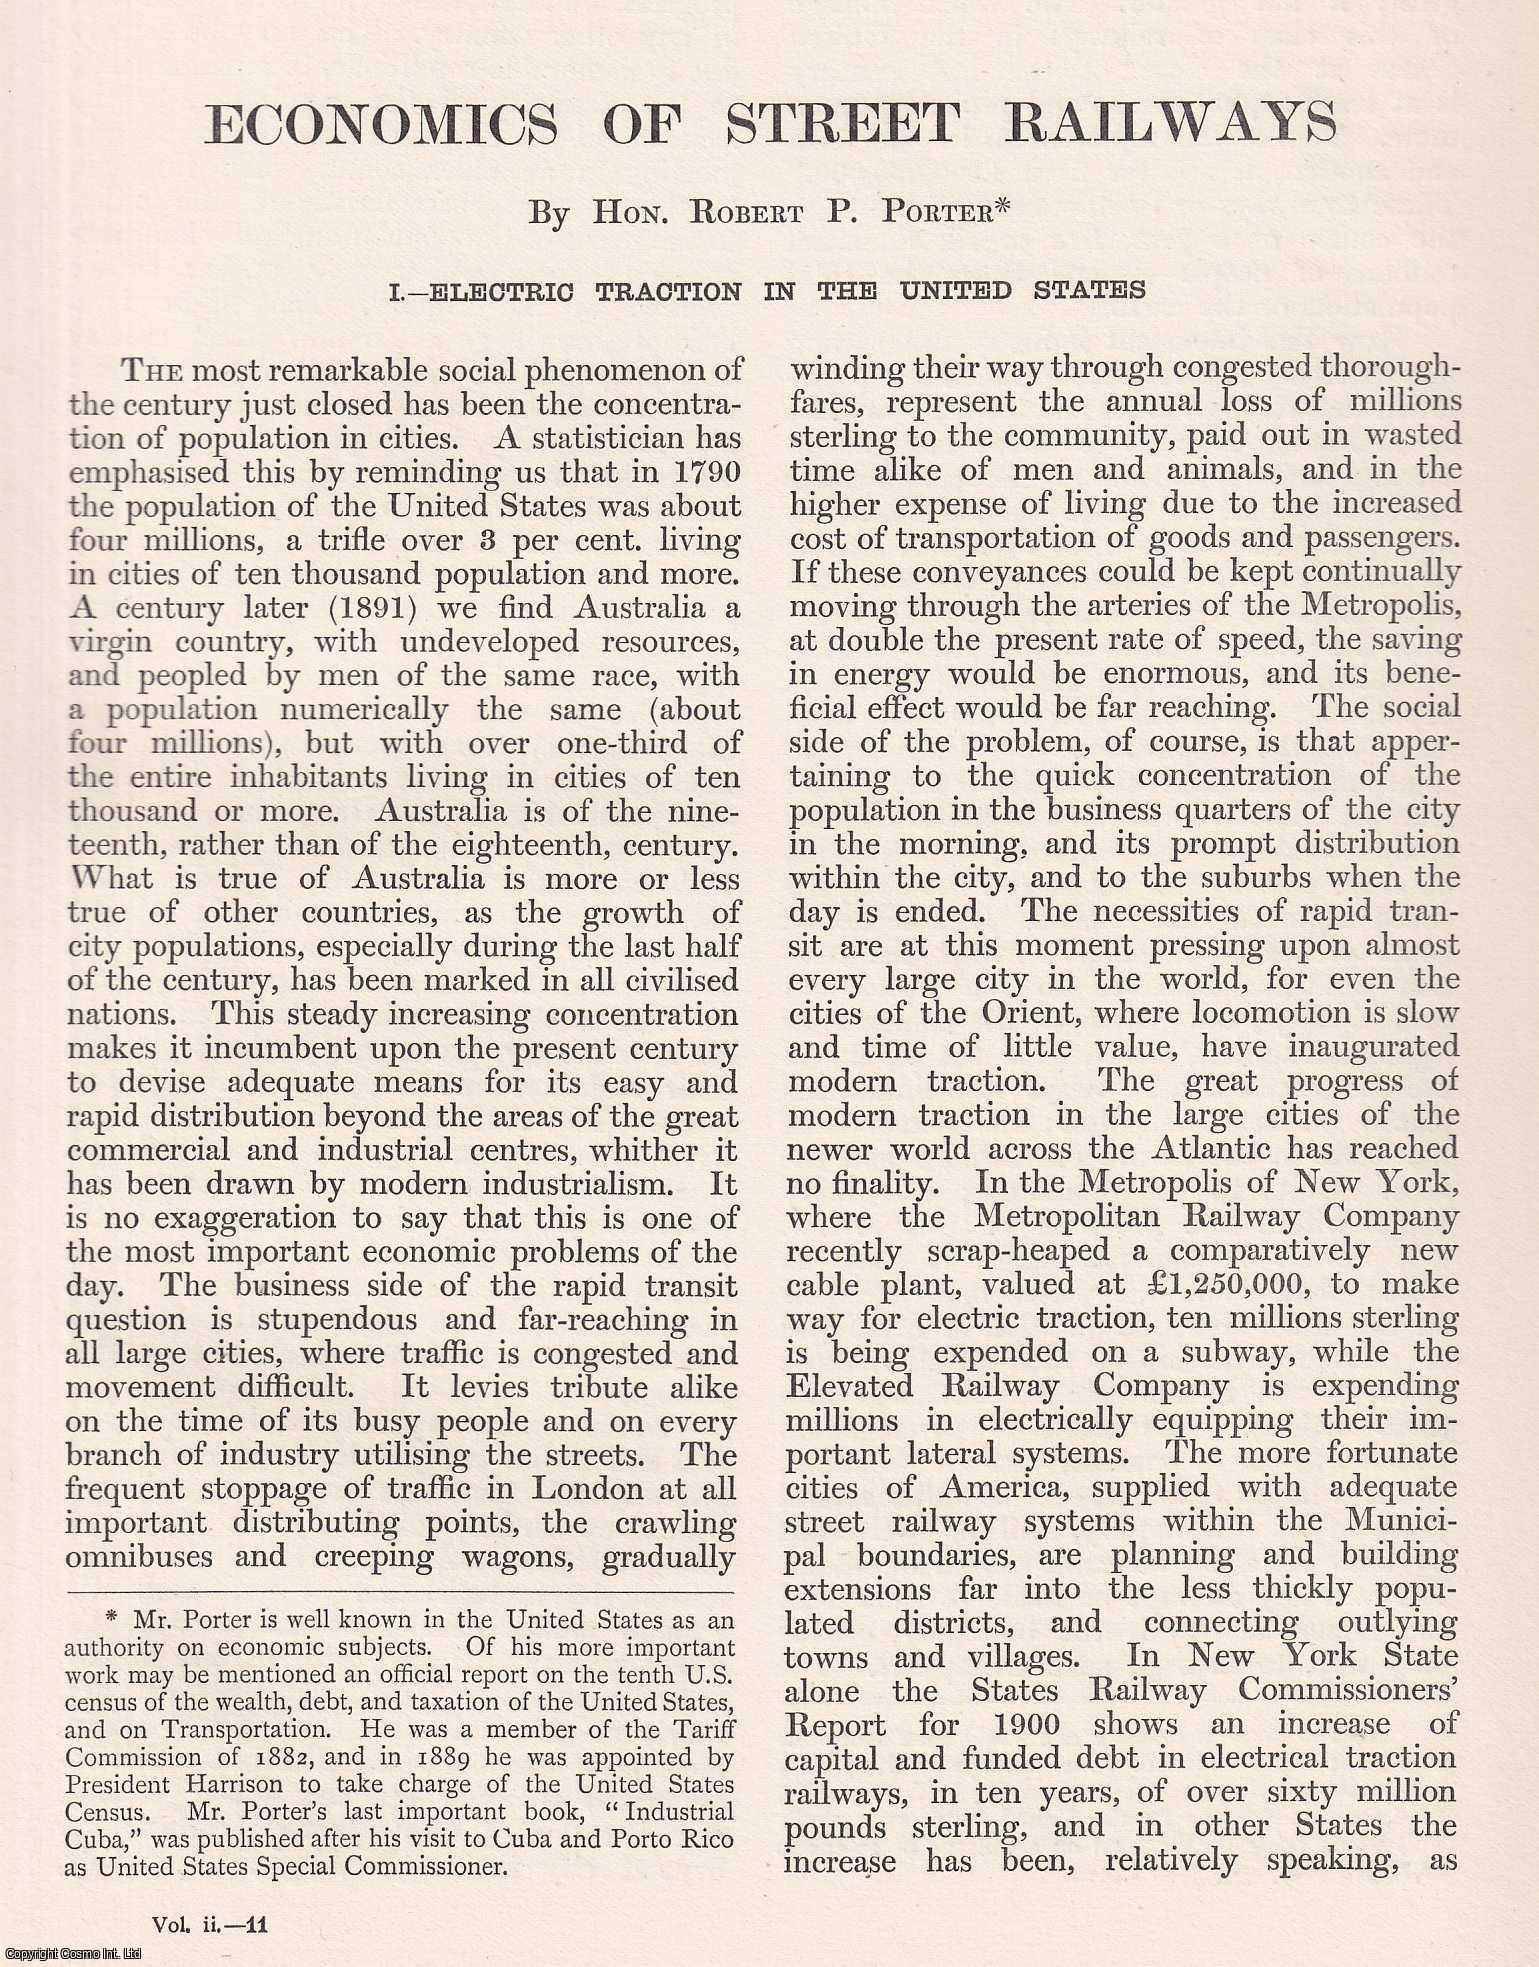 Hon. Robert P. Porter - Electric Traction in the United States. Economics of Street Railways. An original article from Engineering, 1901.